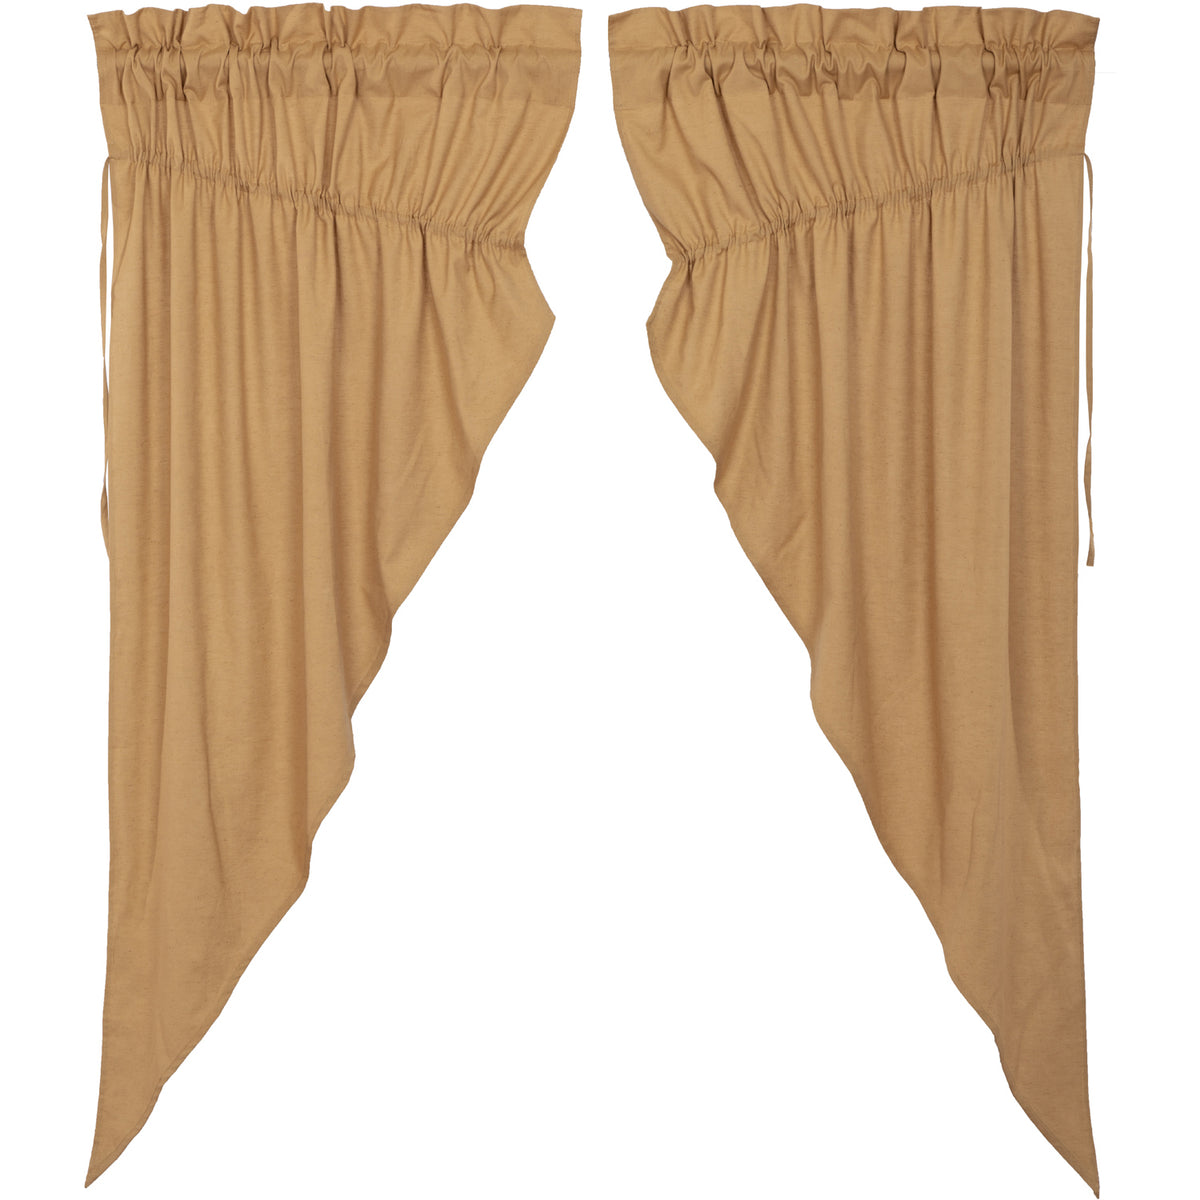 April & Olive Simple Life Flax Khaki Prairie Short Panel Set of 2 63x36x18 By VHC Brands